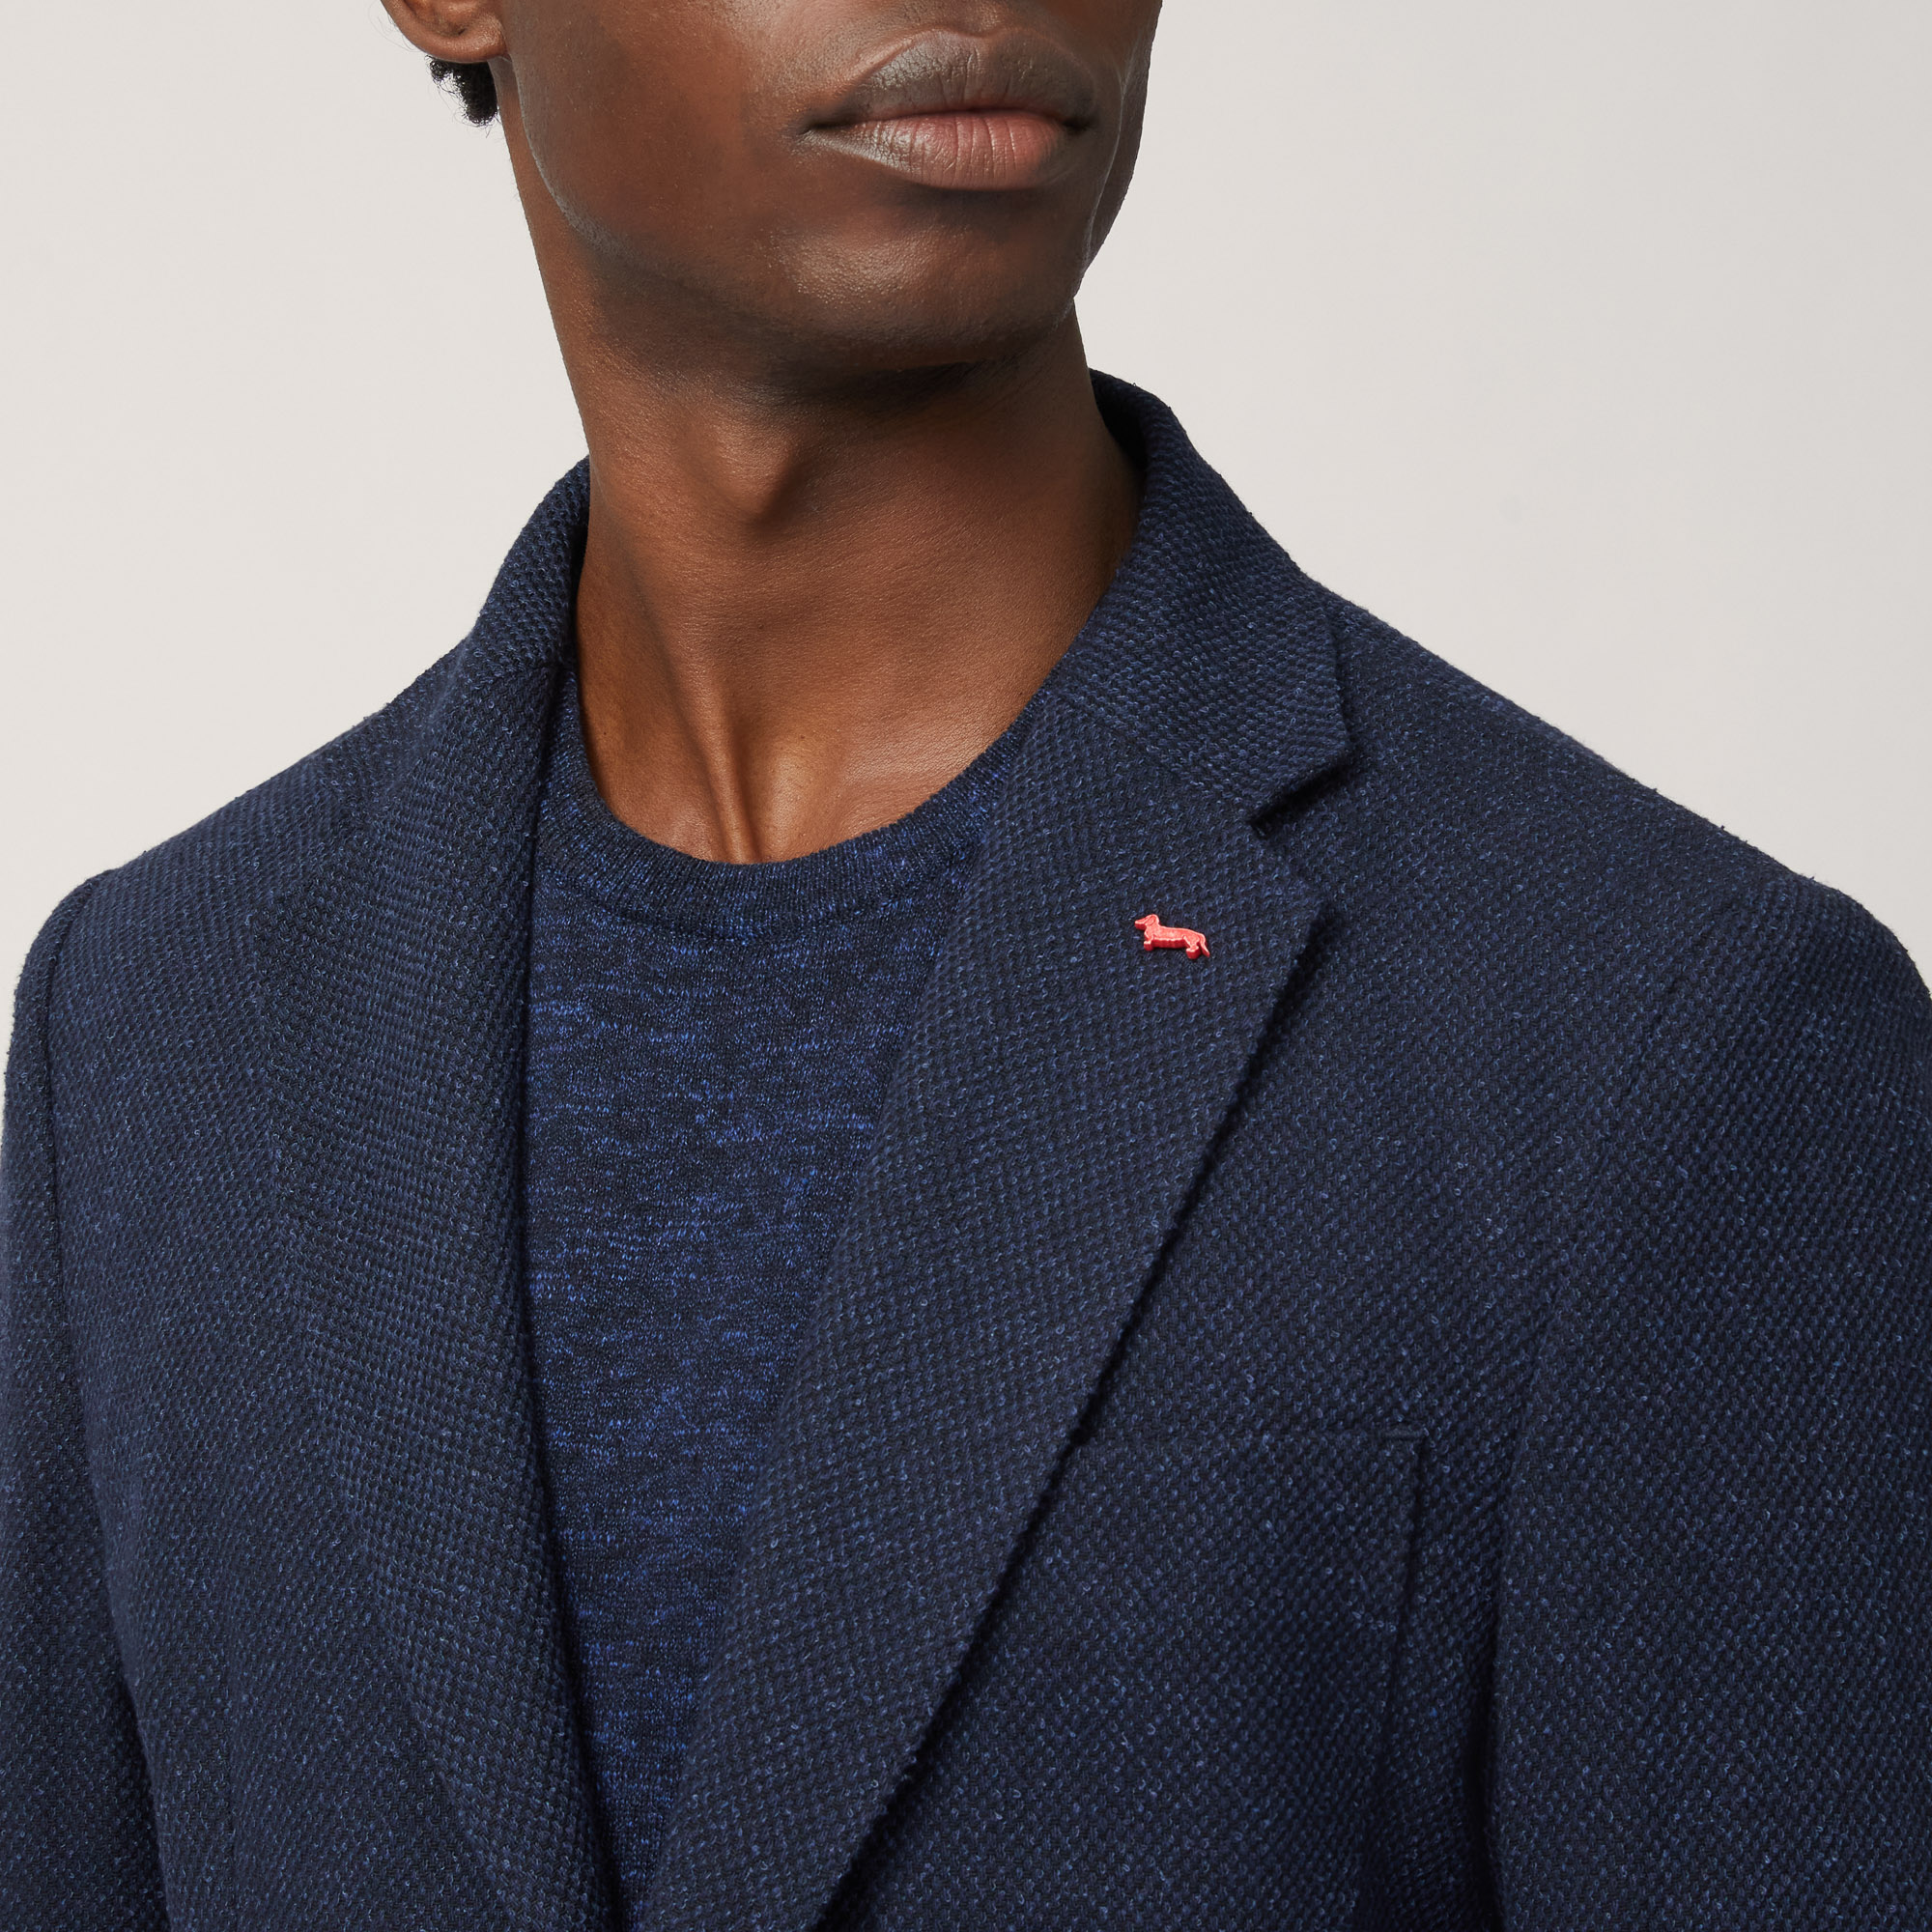 Cotton and Linen Jacket with Pockets and Breast Pocket, Blue, large image number 2